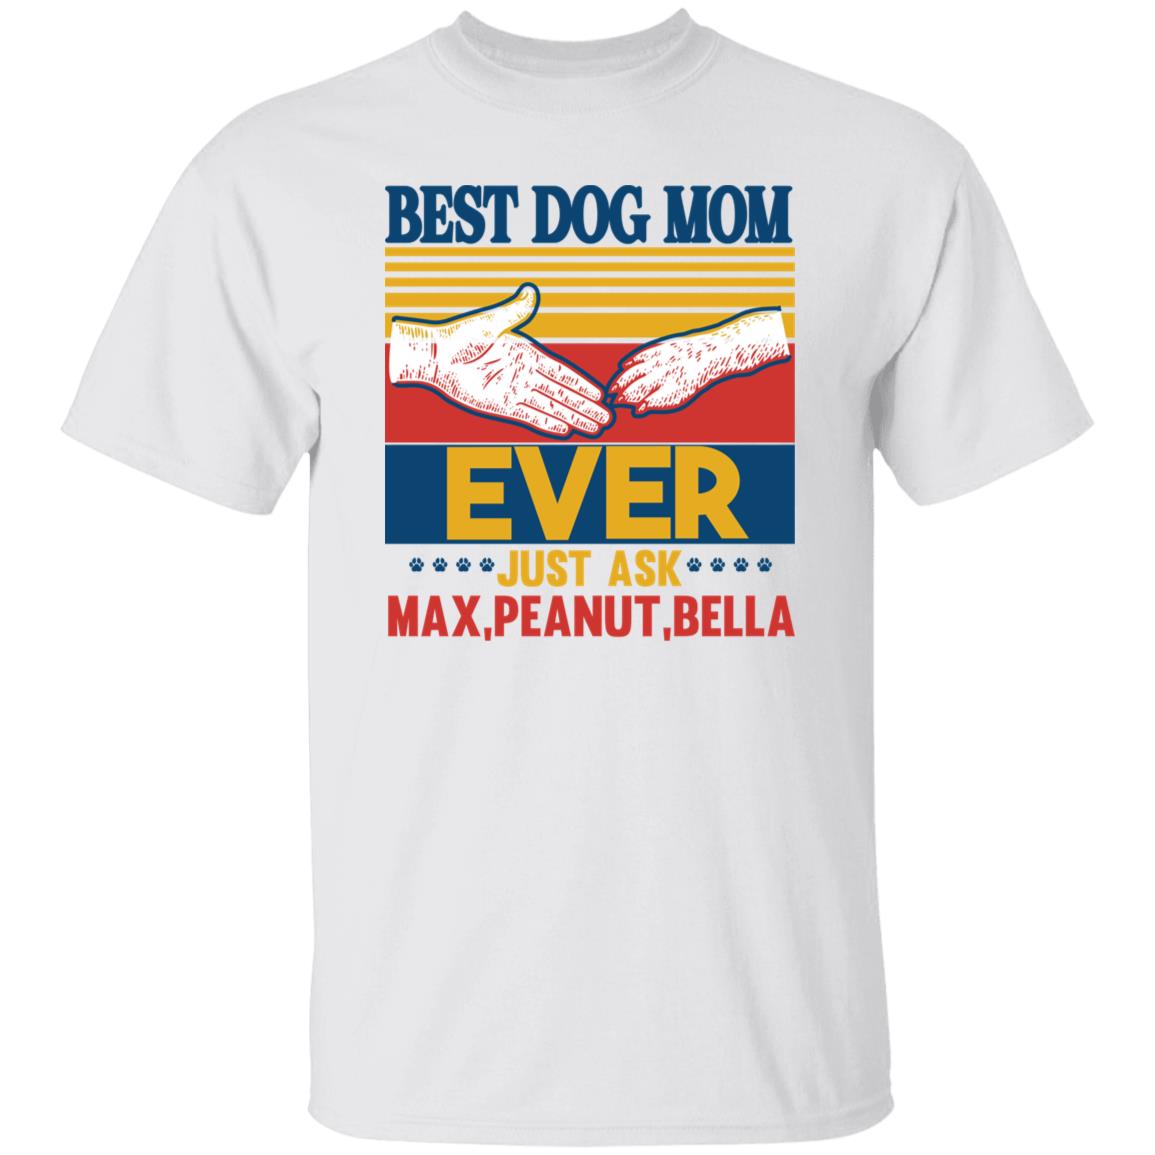 Personalized Shirt - Best Dog Mom Ever Customized Gift for Dog Mom